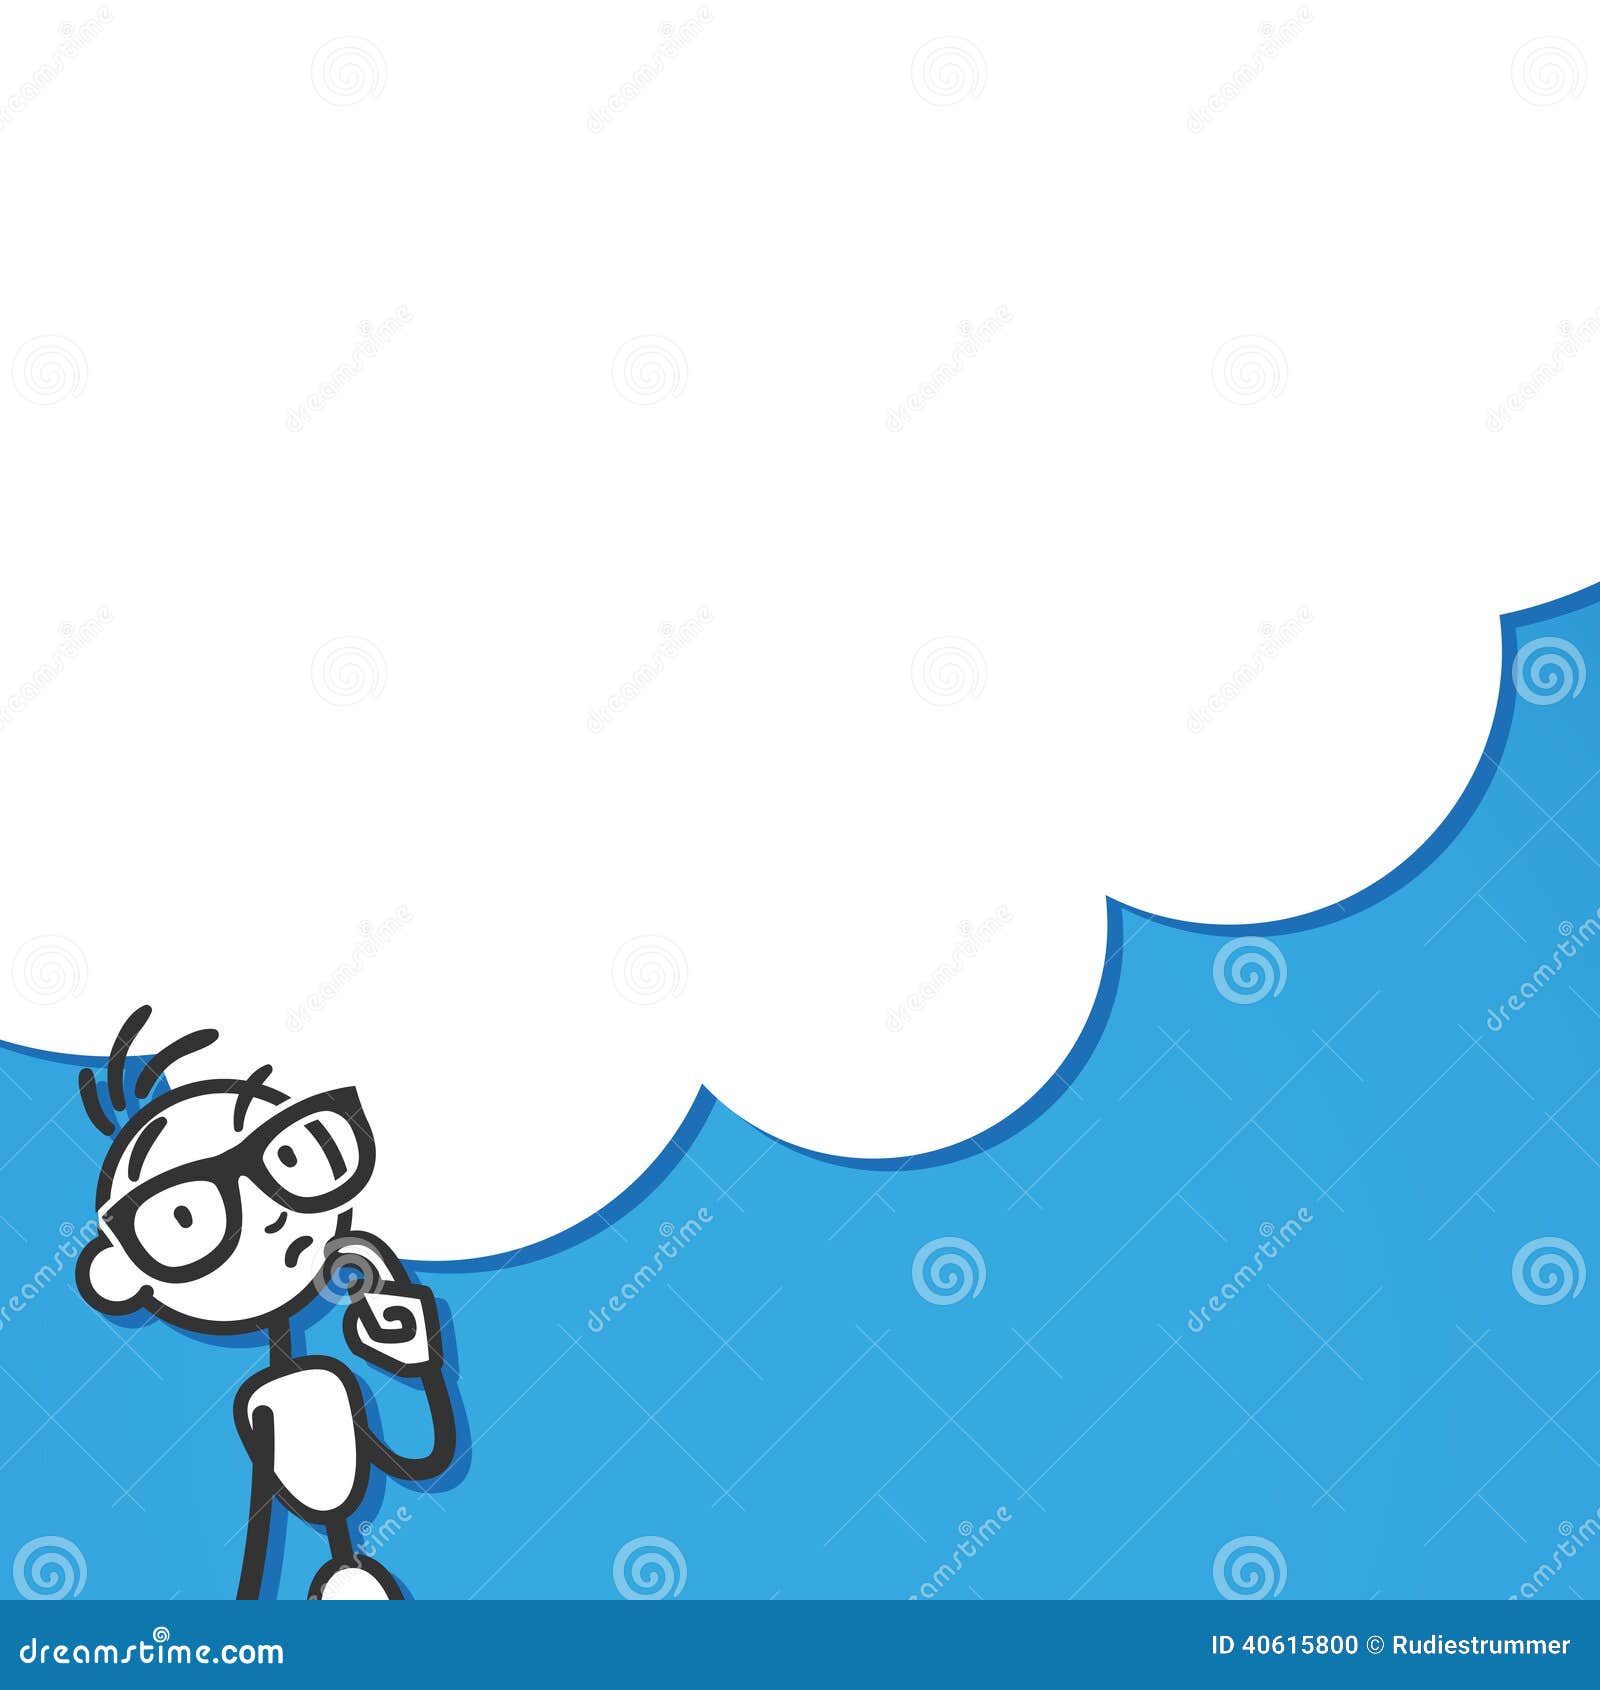 Stickman Pondering Thinking Cloud Stock Vector - Illustration of question,  plan: 40615800